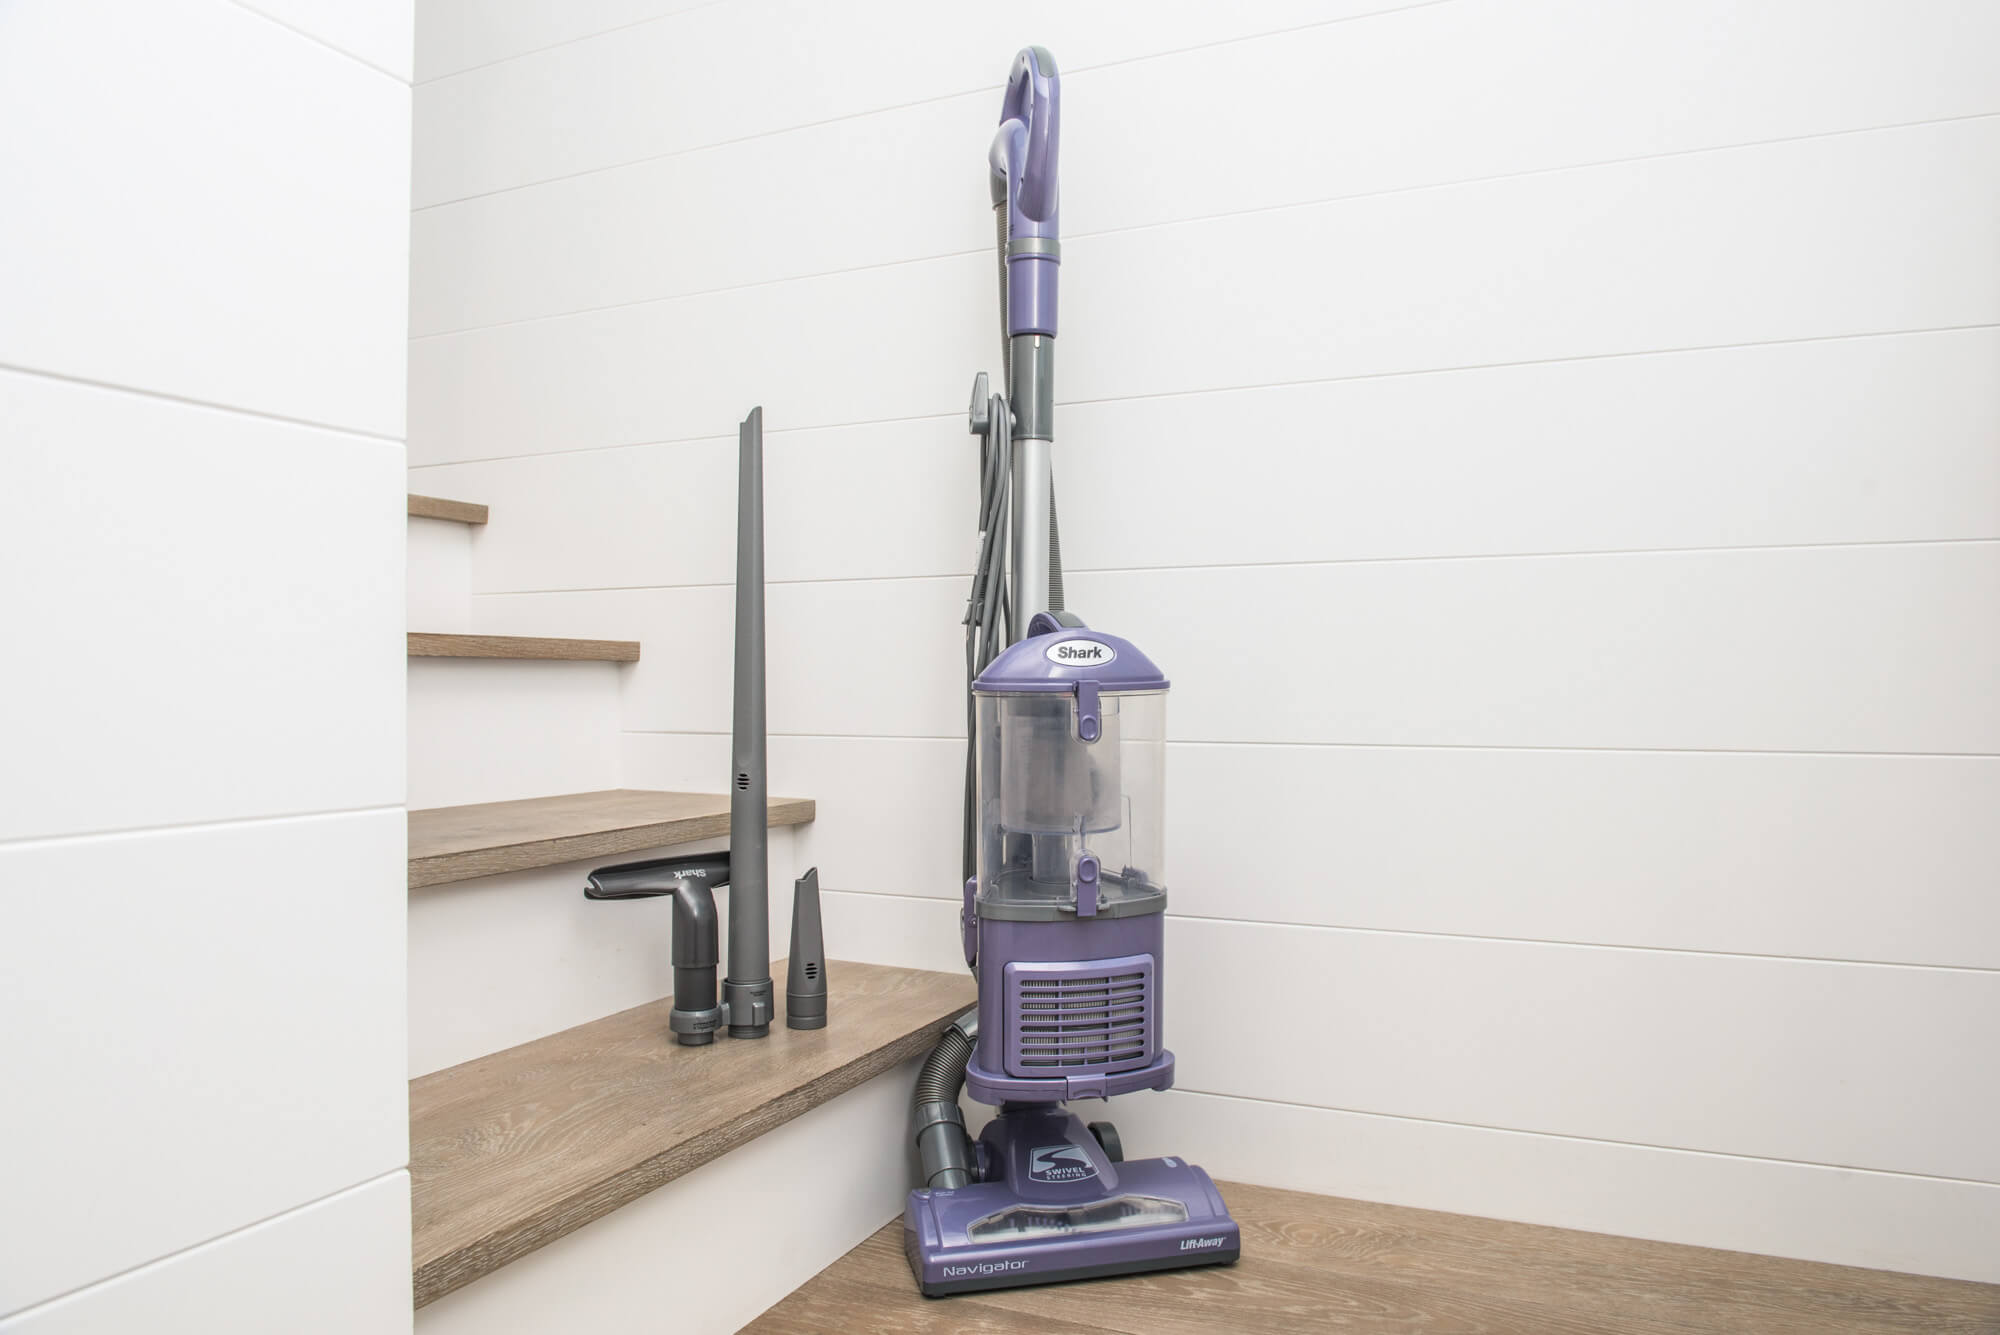 Best Handheld Vacuums For Pet Hair 2023 - Forbes Vetted